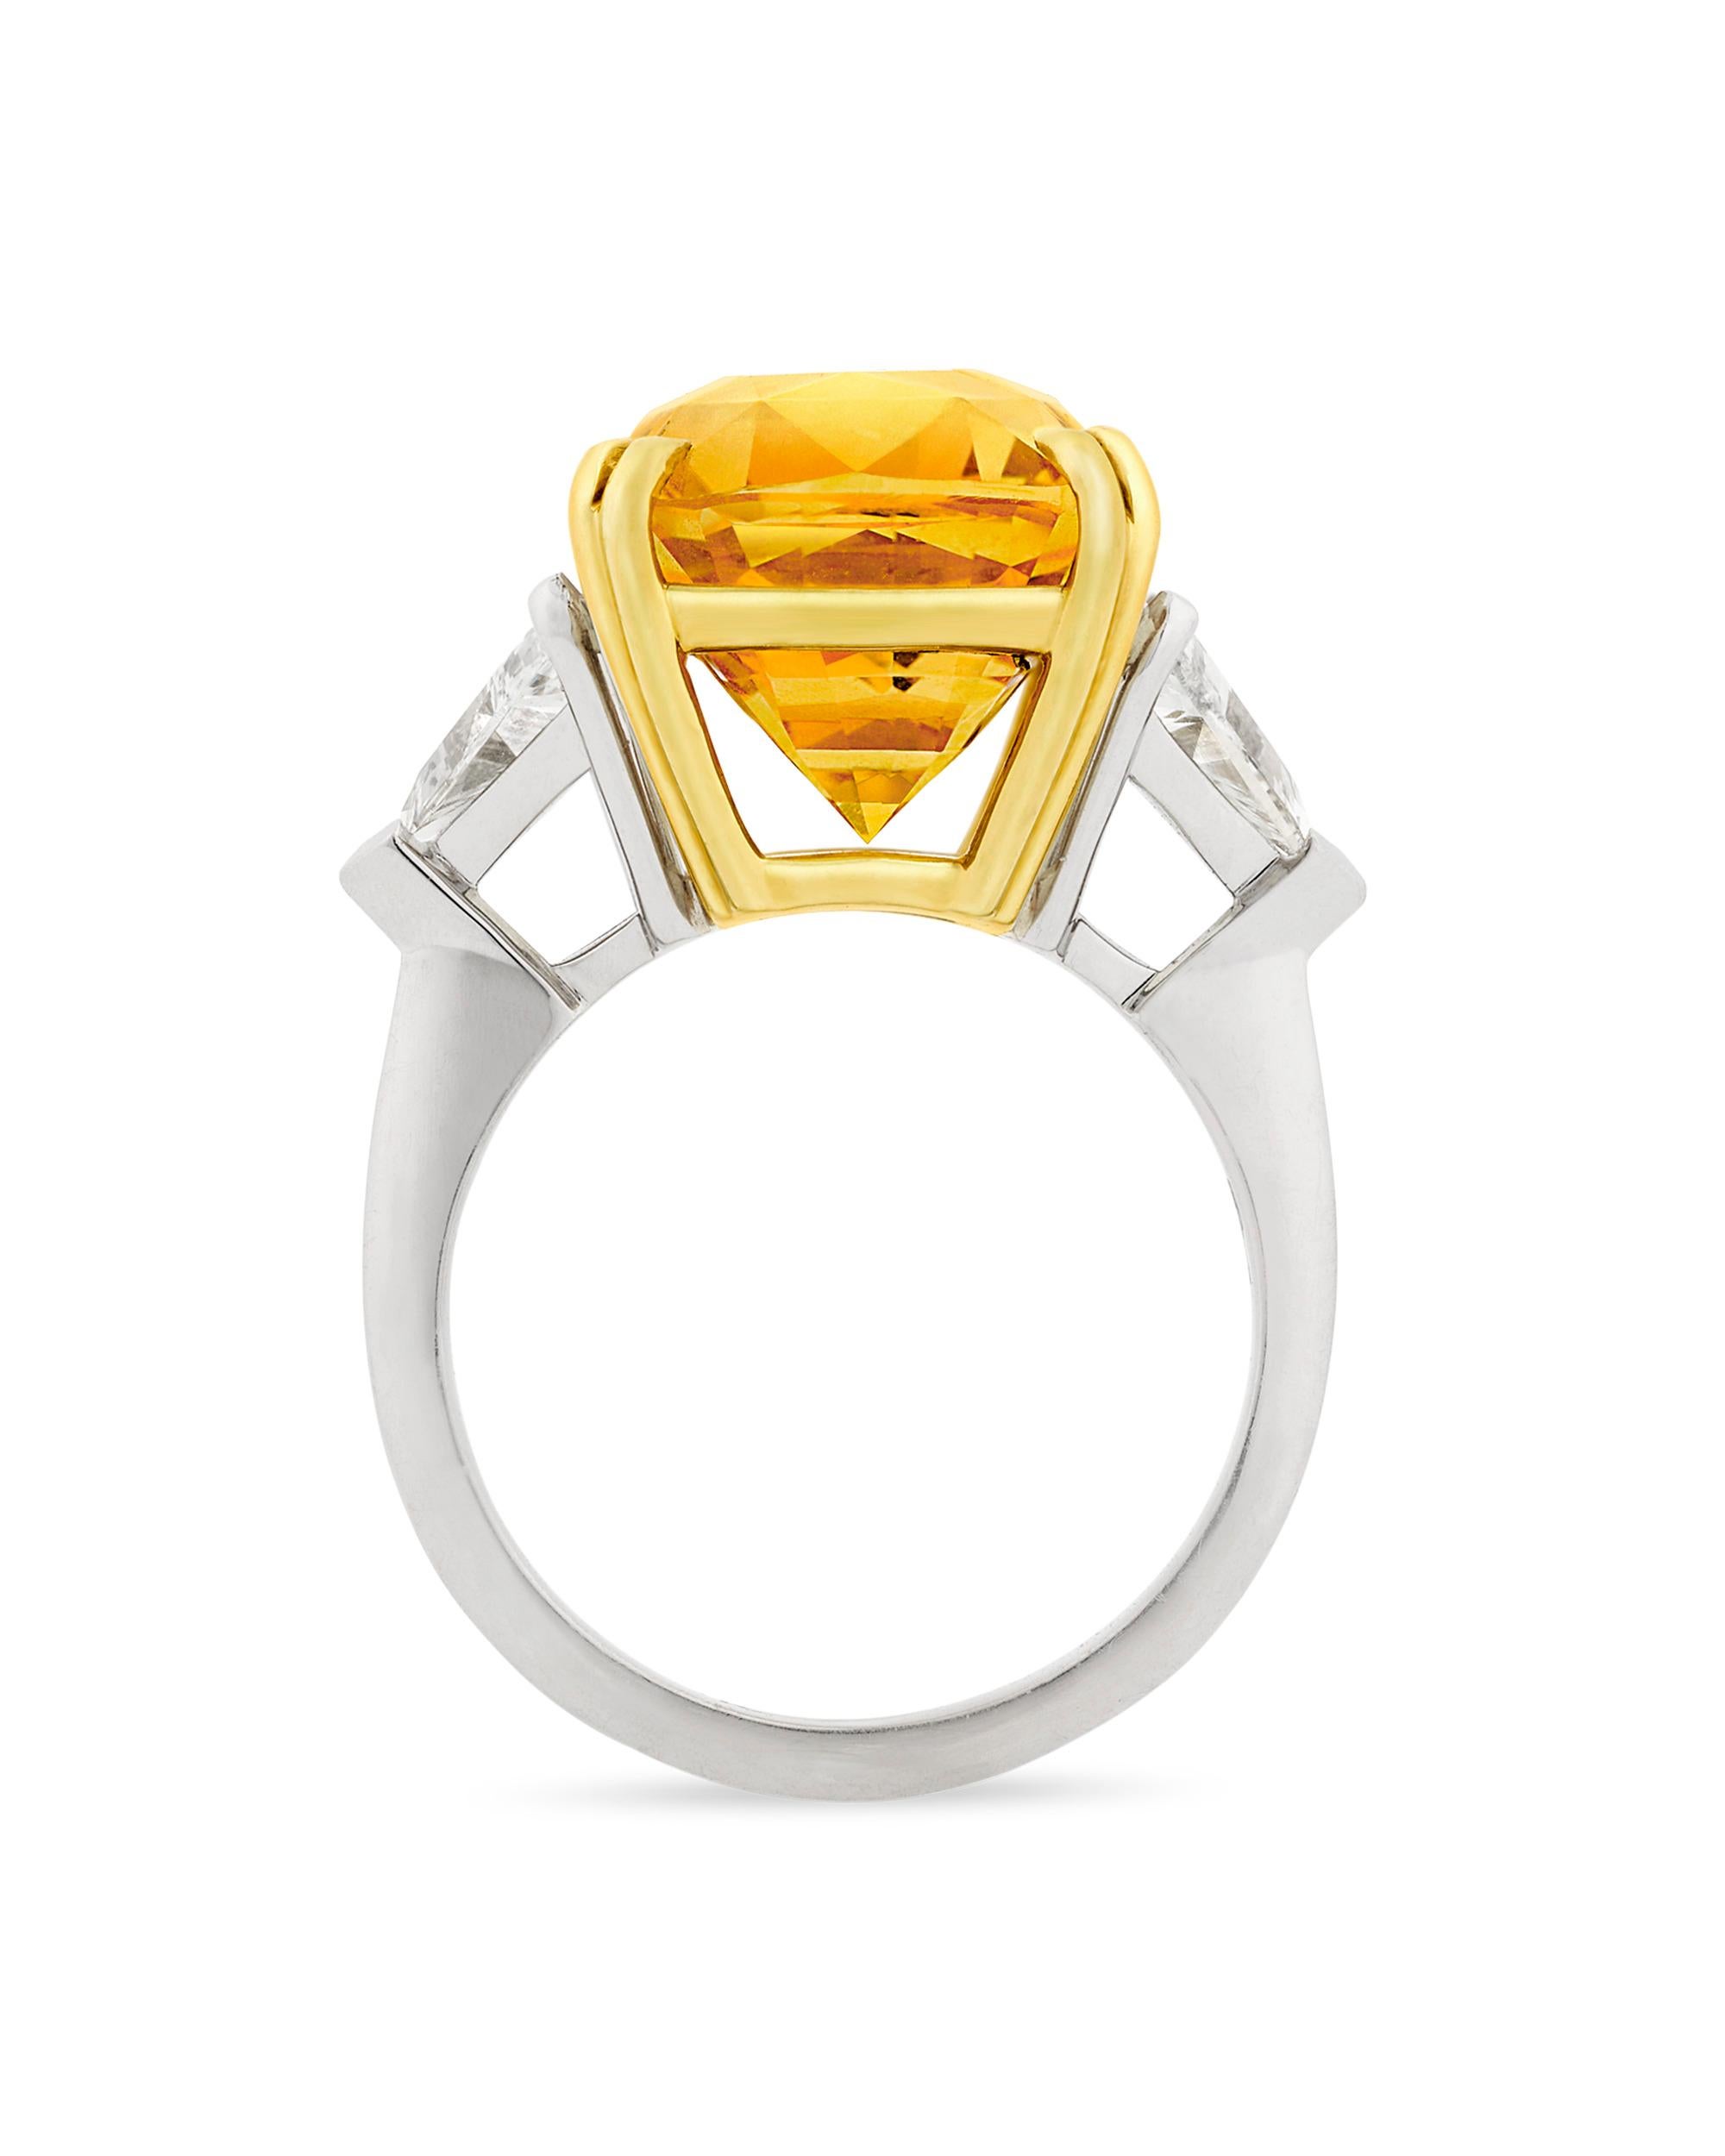 Sitting at the center of this ring is a breathtaking 15.83-carat orangy-yellow sapphire. With its stunning beauty and monumental size, this cushion-shaped gem displays amazing clarity and a highly saturated golden hue. Flanked by two white diamonds